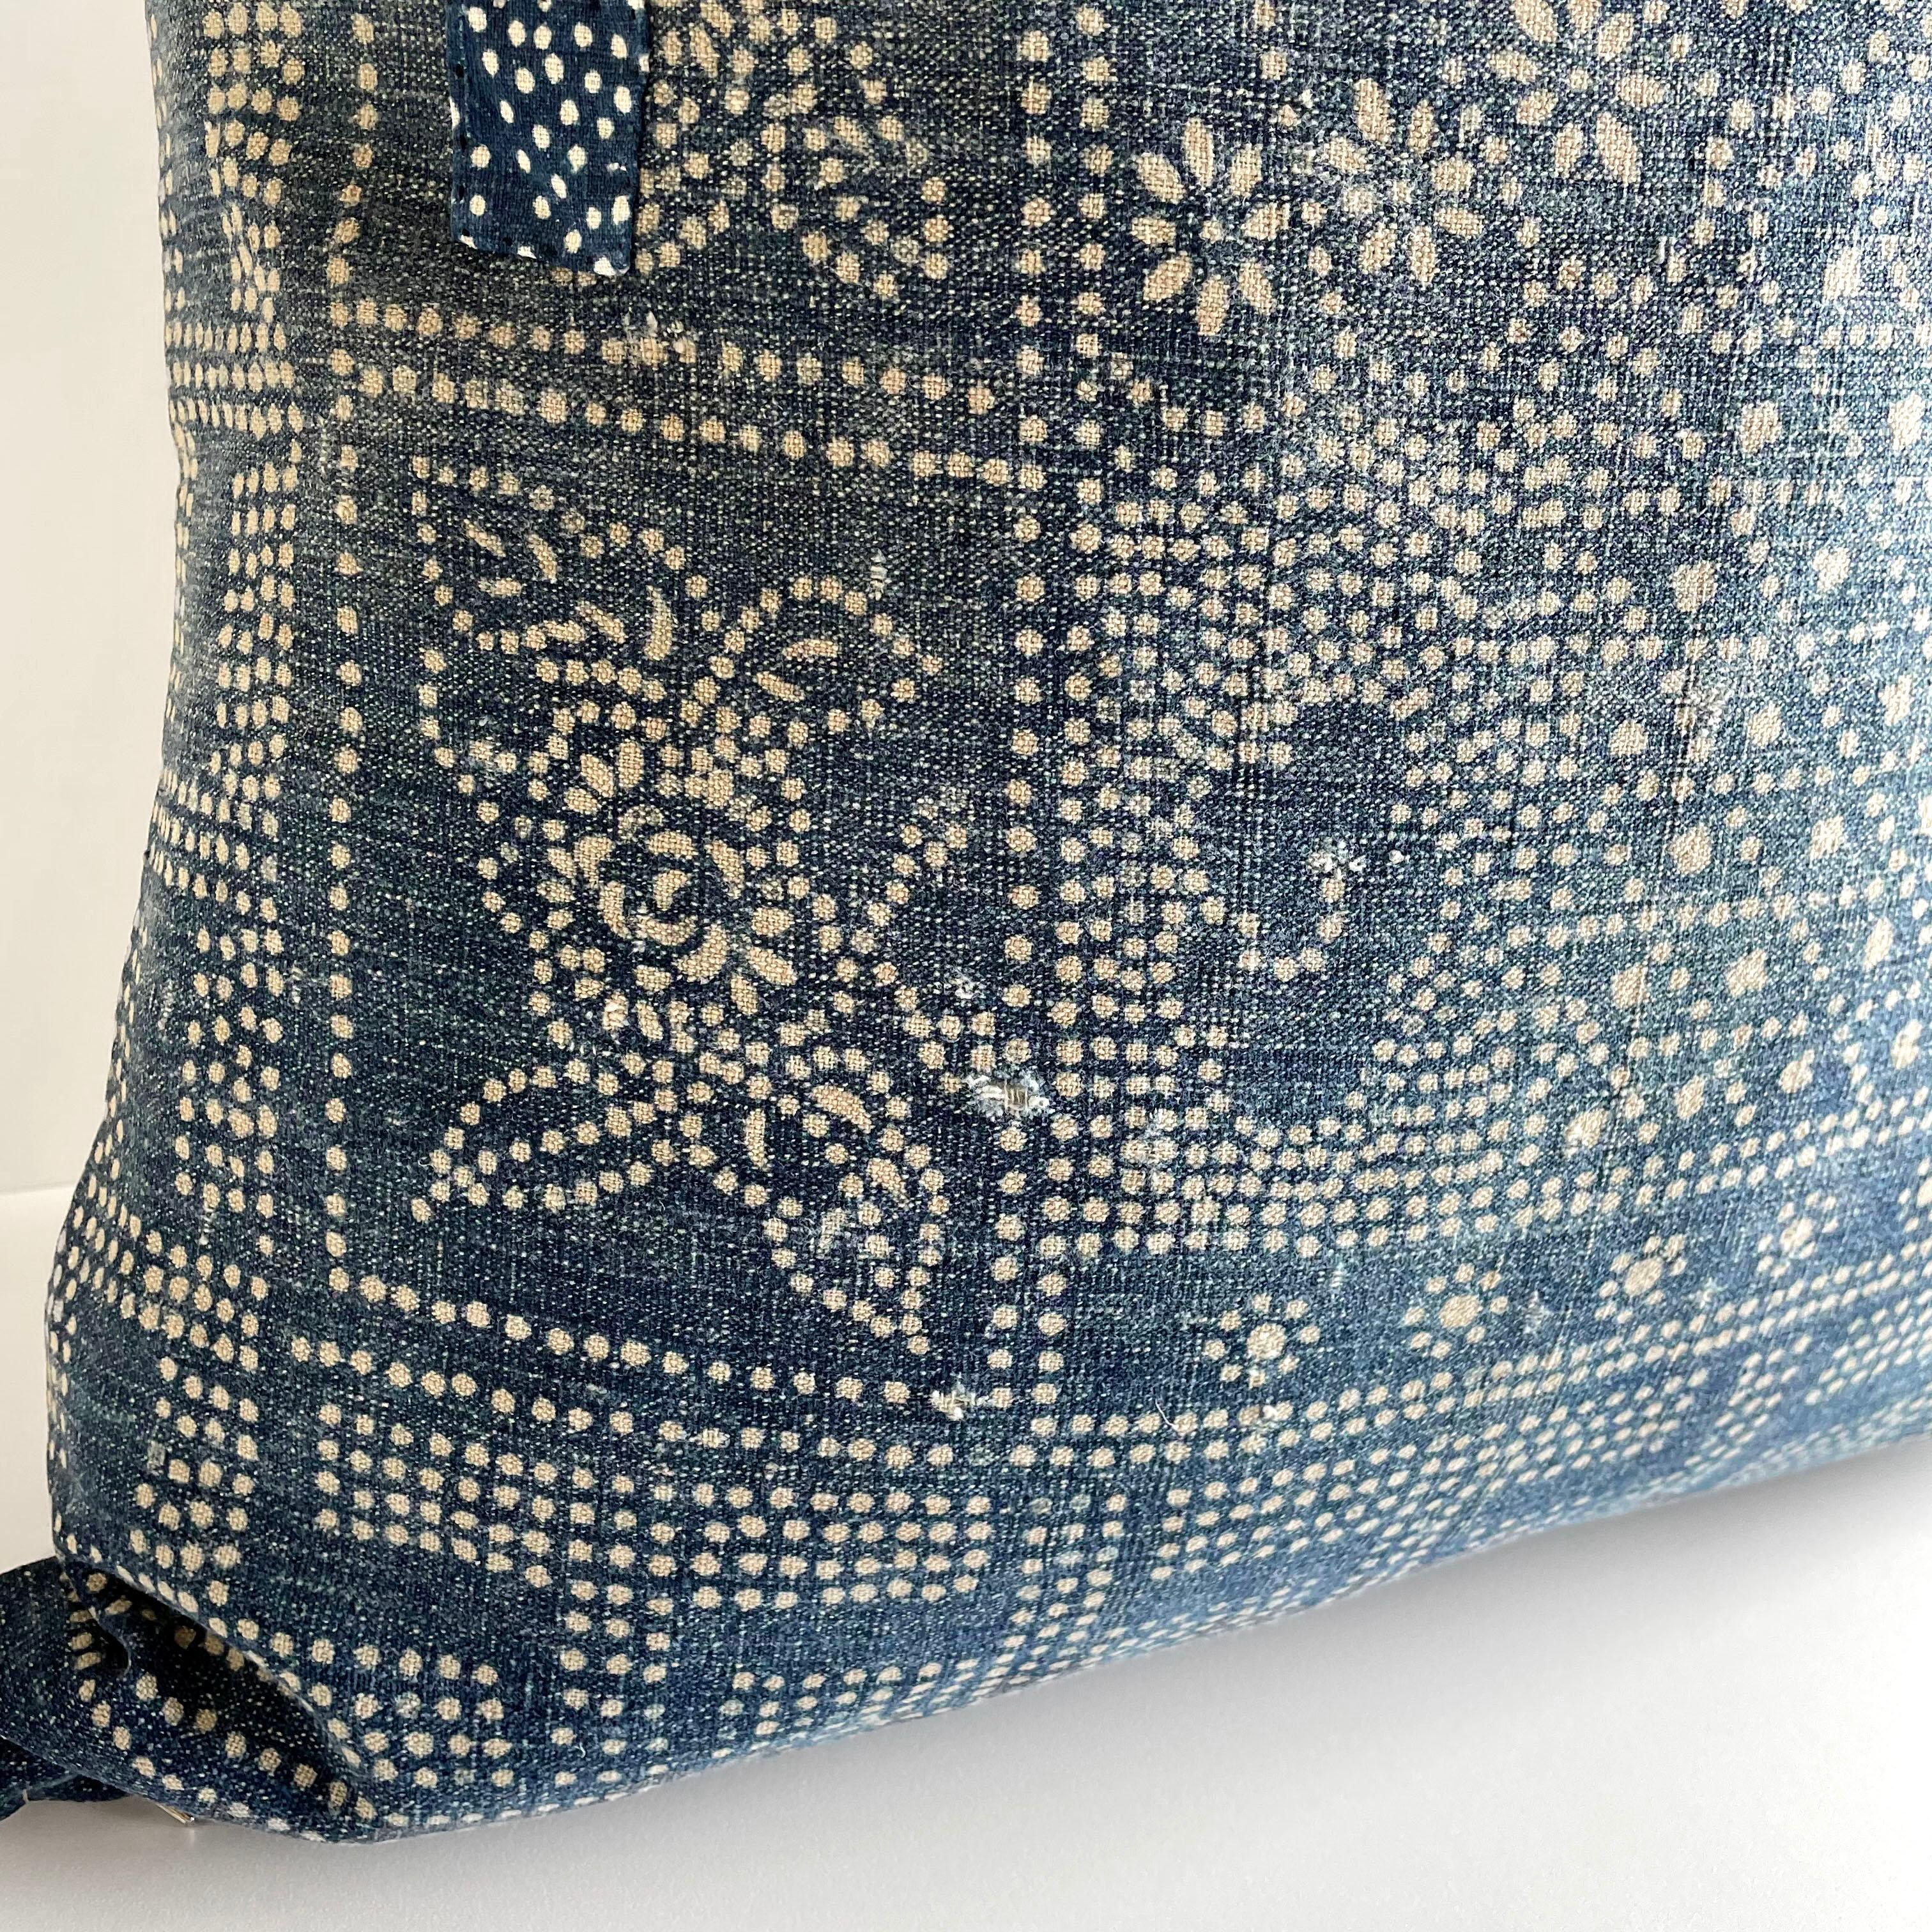 Vintage custom made batik blue accent pillow with down feather insert this vintage textile pillow face features a vintage batik front, natural linen backing, and original hand embroidery. The backing is 100% Belgian linen in natural linen. Our